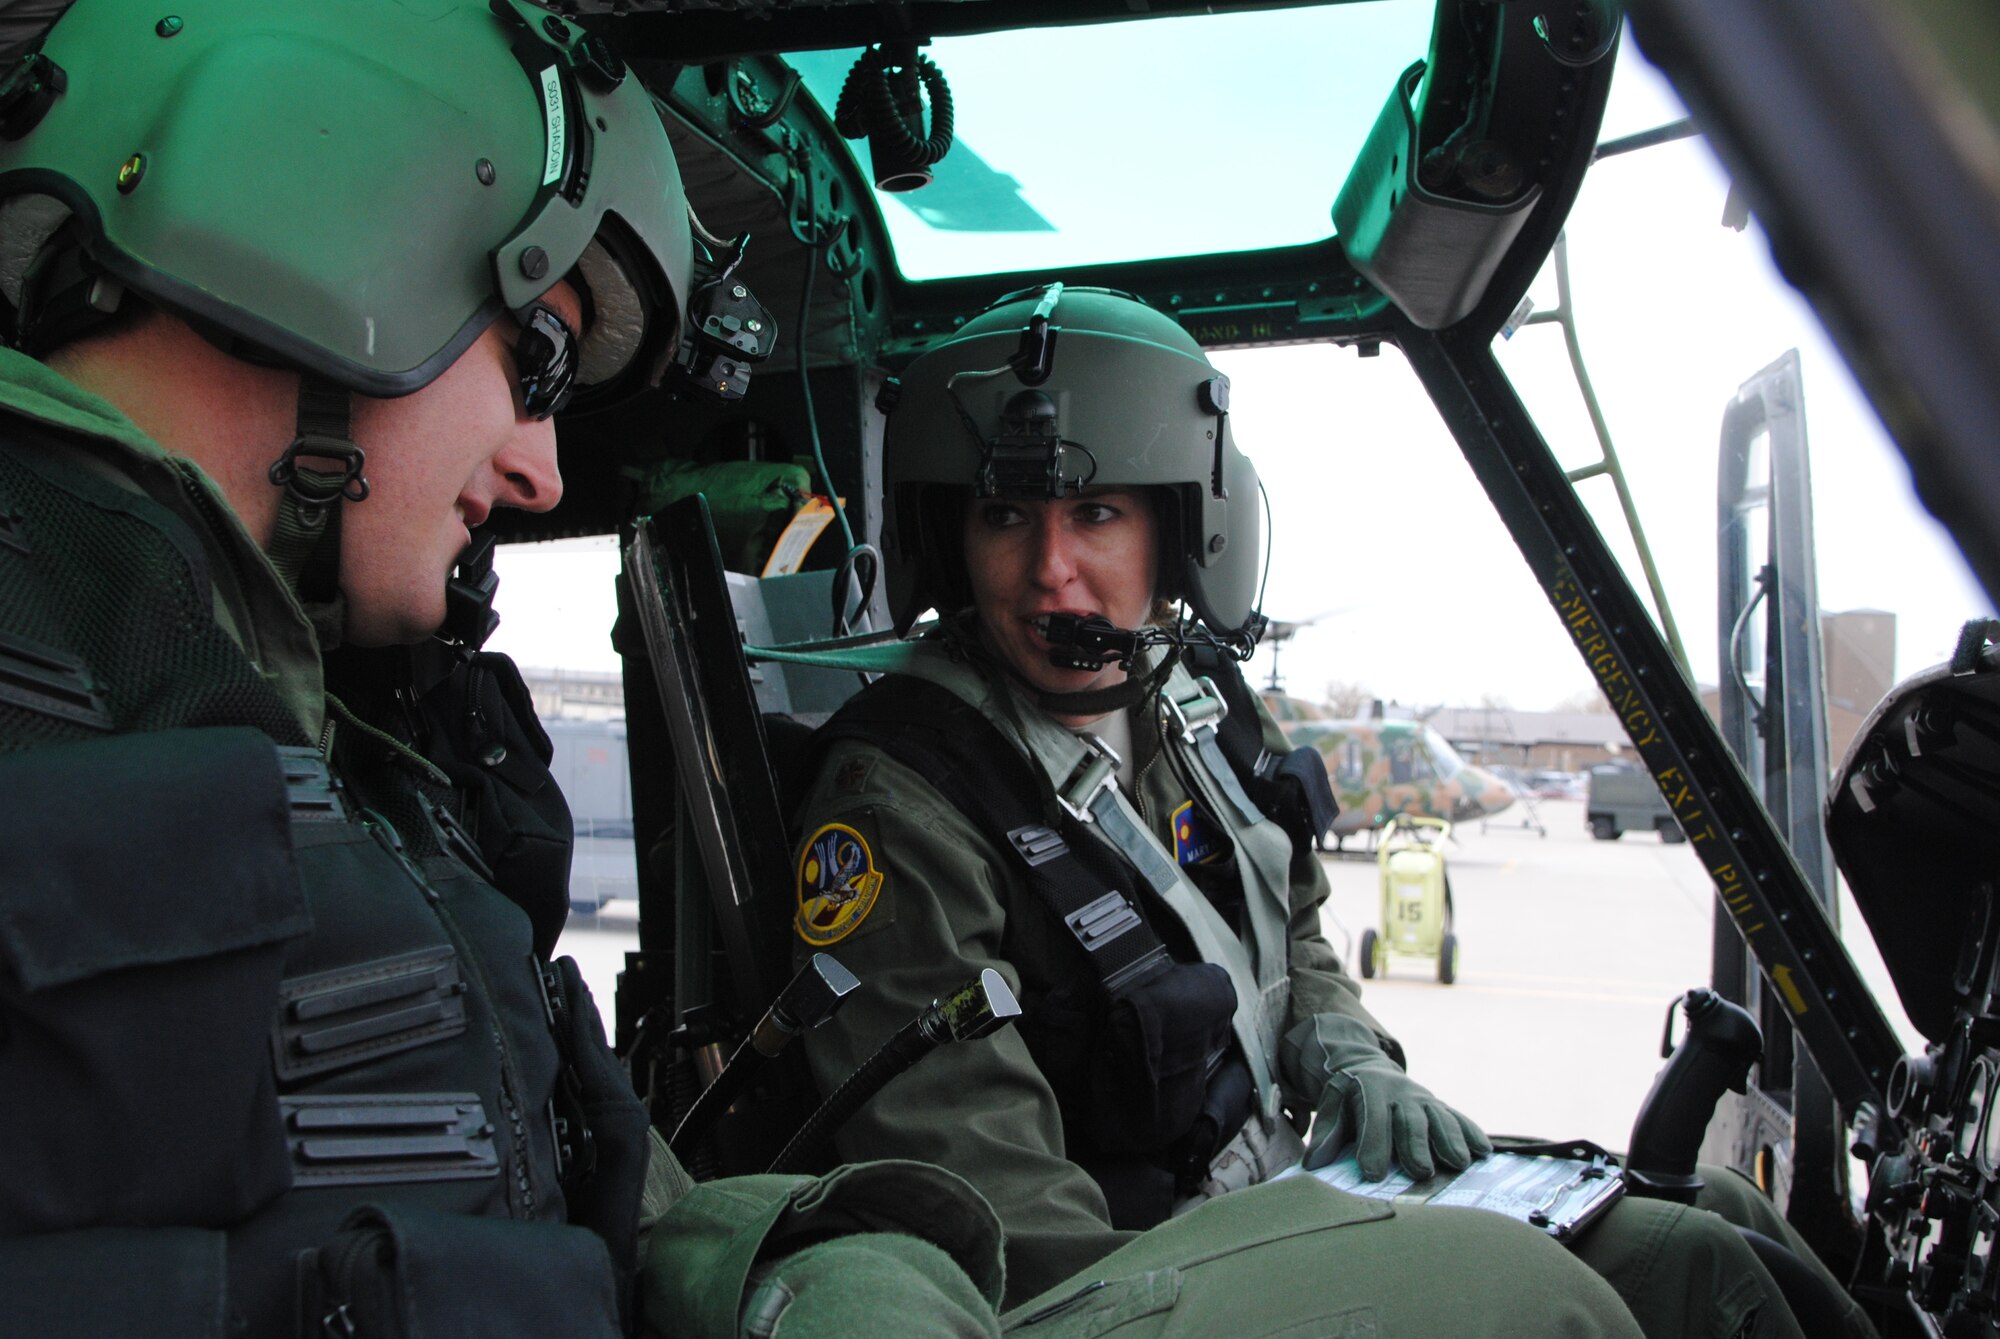 Maj. Mary Clark instructs 1st Lt. David Shadoin during pre-flight procedures Dec. 16, 2014, at Shindand Air Base, Afghanistan. Clark is an UH-1N Huey instructor pilot and the 58th Operations Support Squadron's assistant director of operations, and Shadoin a student pilot in the 512th Special Operations Squadron. (U.S. Air Force photo/Jim Fisher)